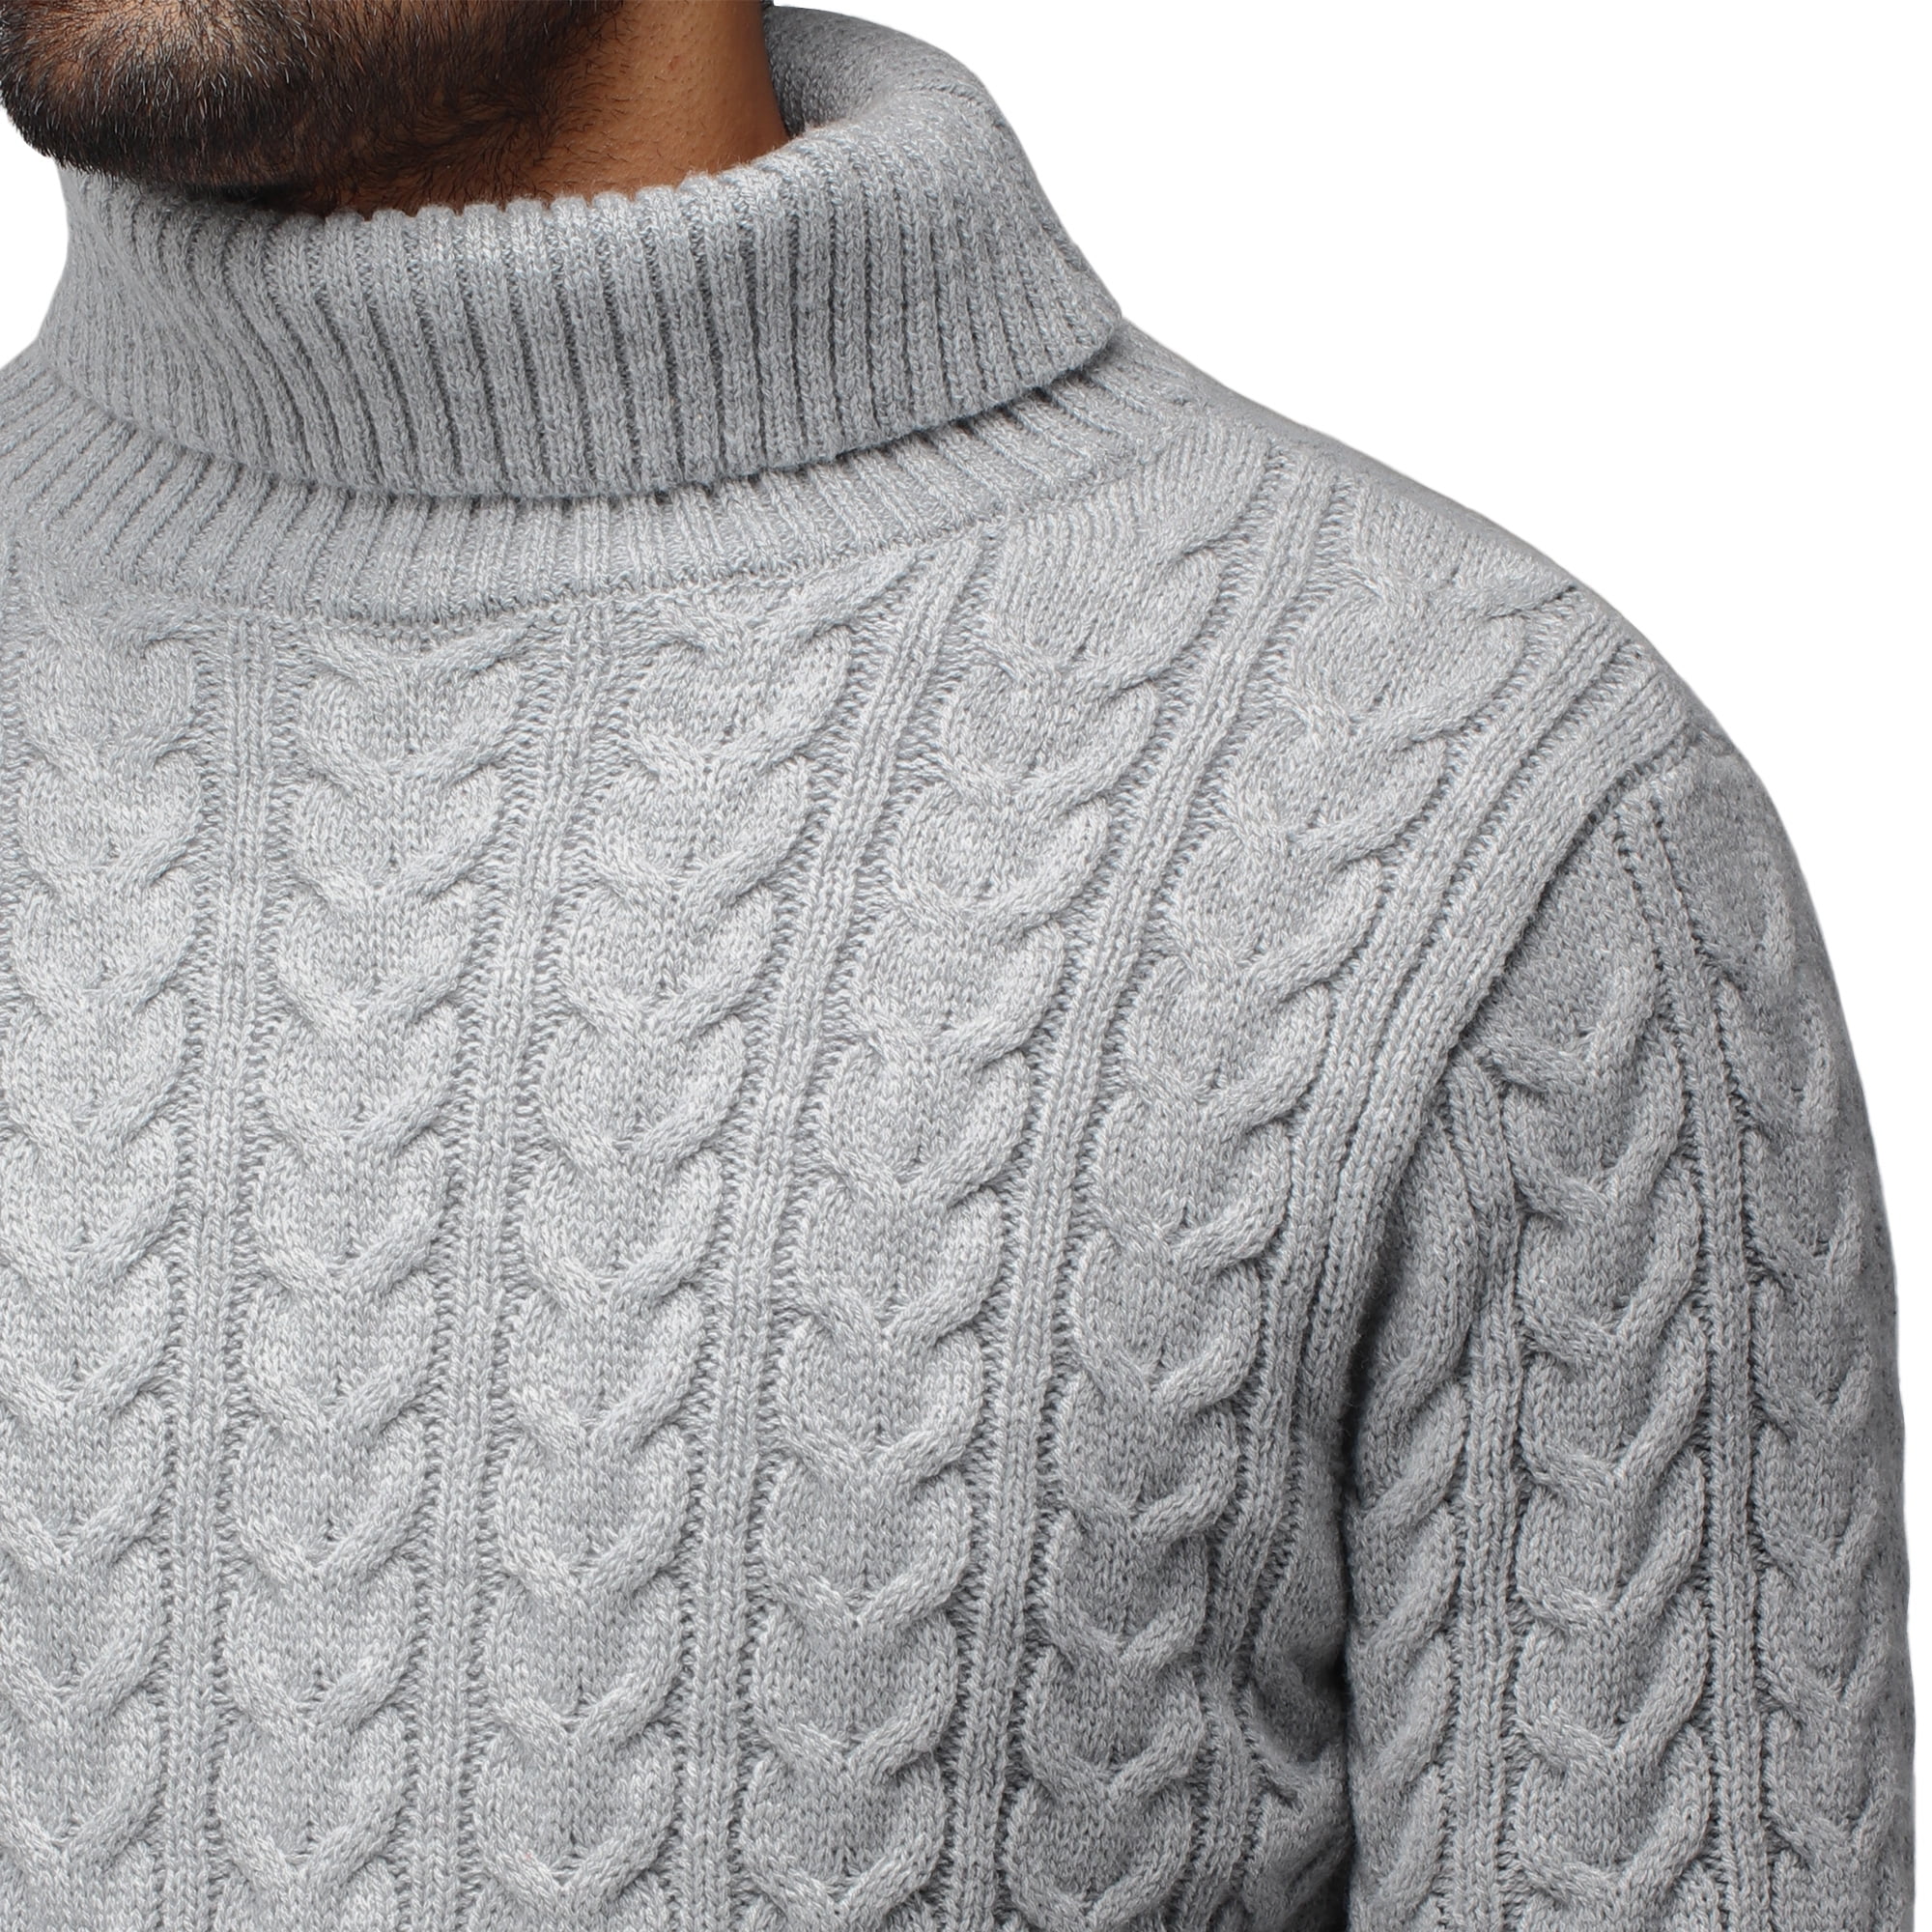 Xray Men's Cable Knit Cowl Neck Sweater In Sage Size Small : Target